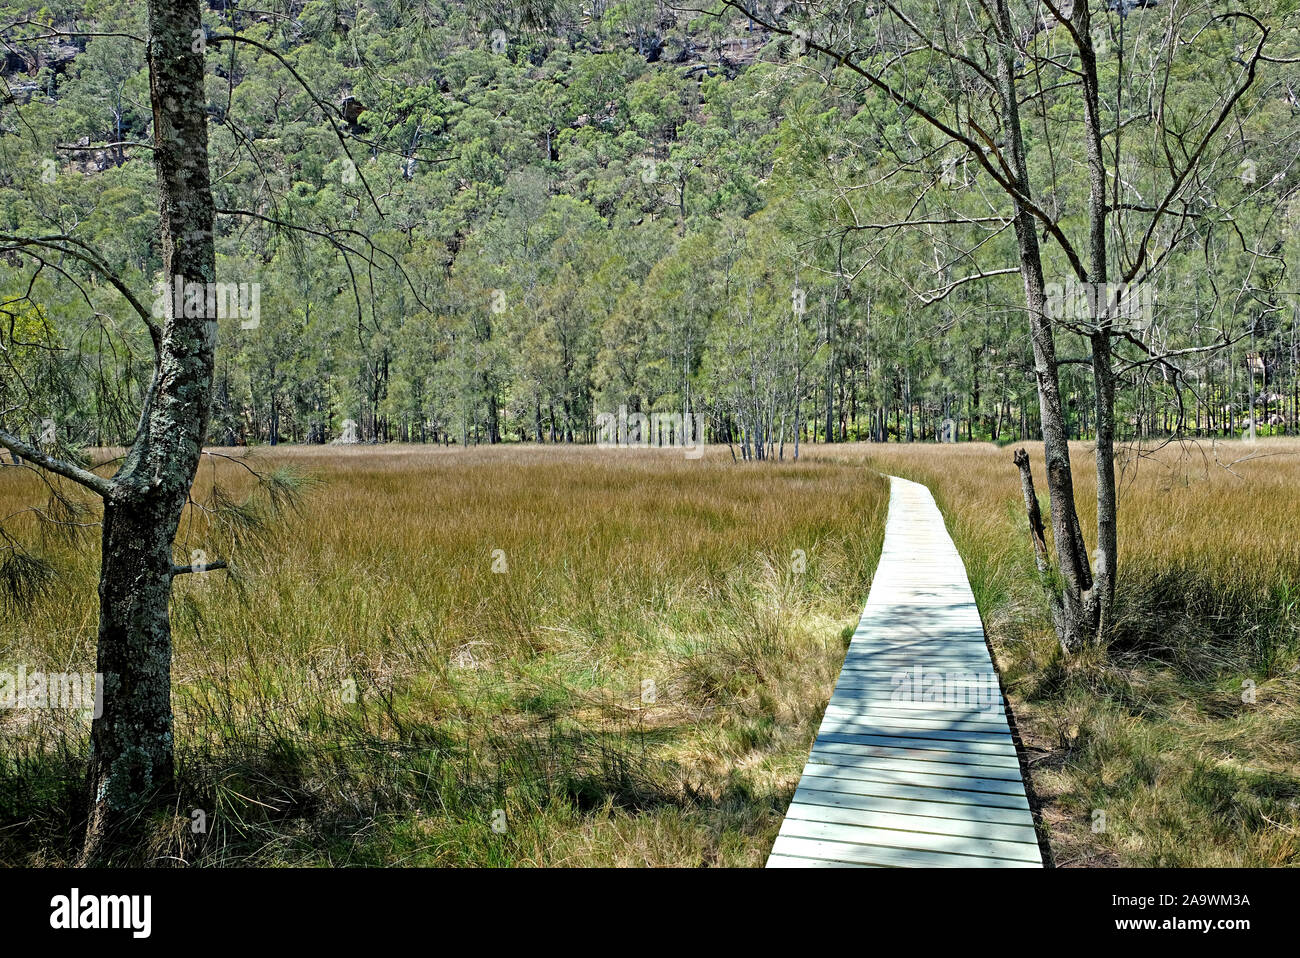 The open salt marsh with a woden path in the middle on the Benowie walking track in Ku-Ring-Gai National Park, New South Wales, Australia. Stock Photo